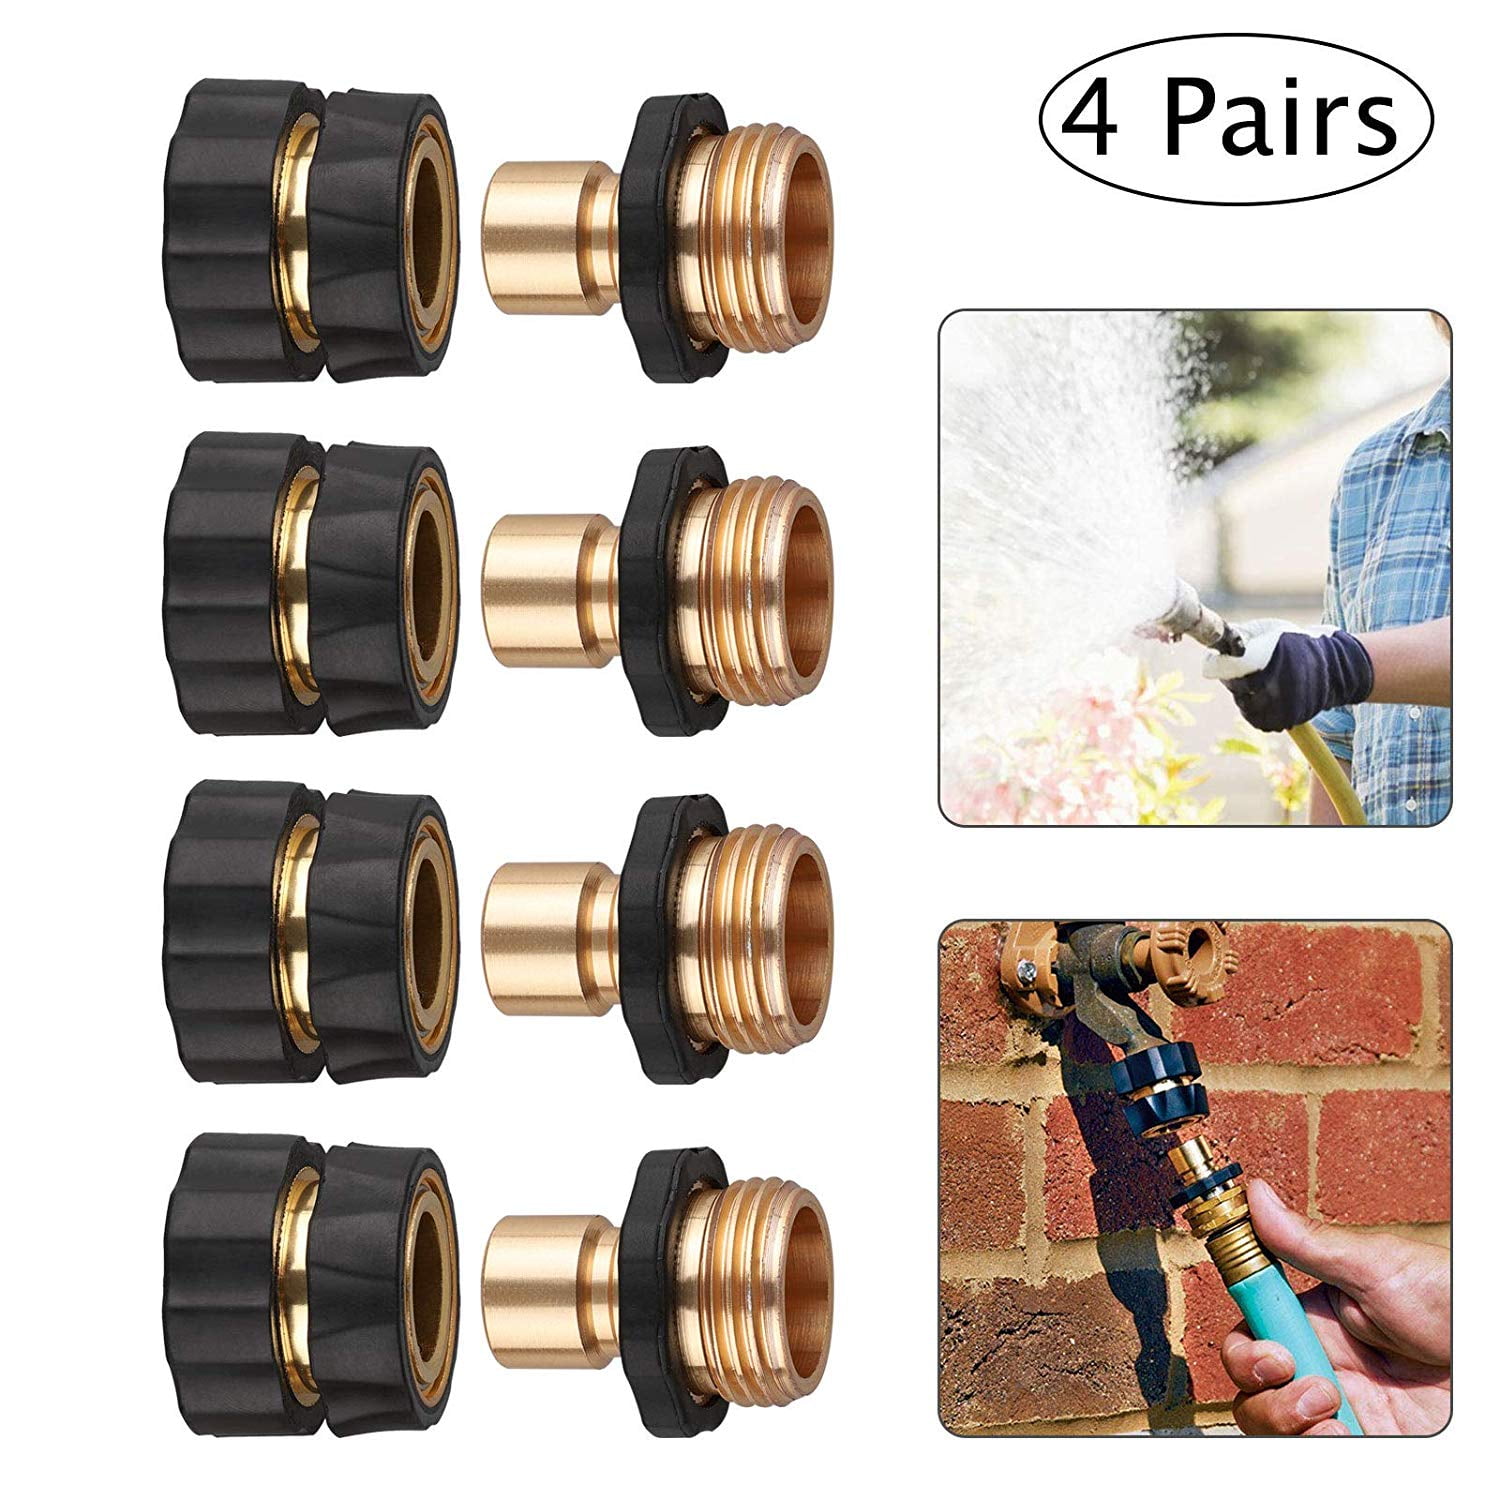 CDIYTOOL 5Set Garden Water Hose Quick Connect Connector Fittings Solid Brass 3//4 Inch GHT Connectors with Extra Rubber Washers Male and Female